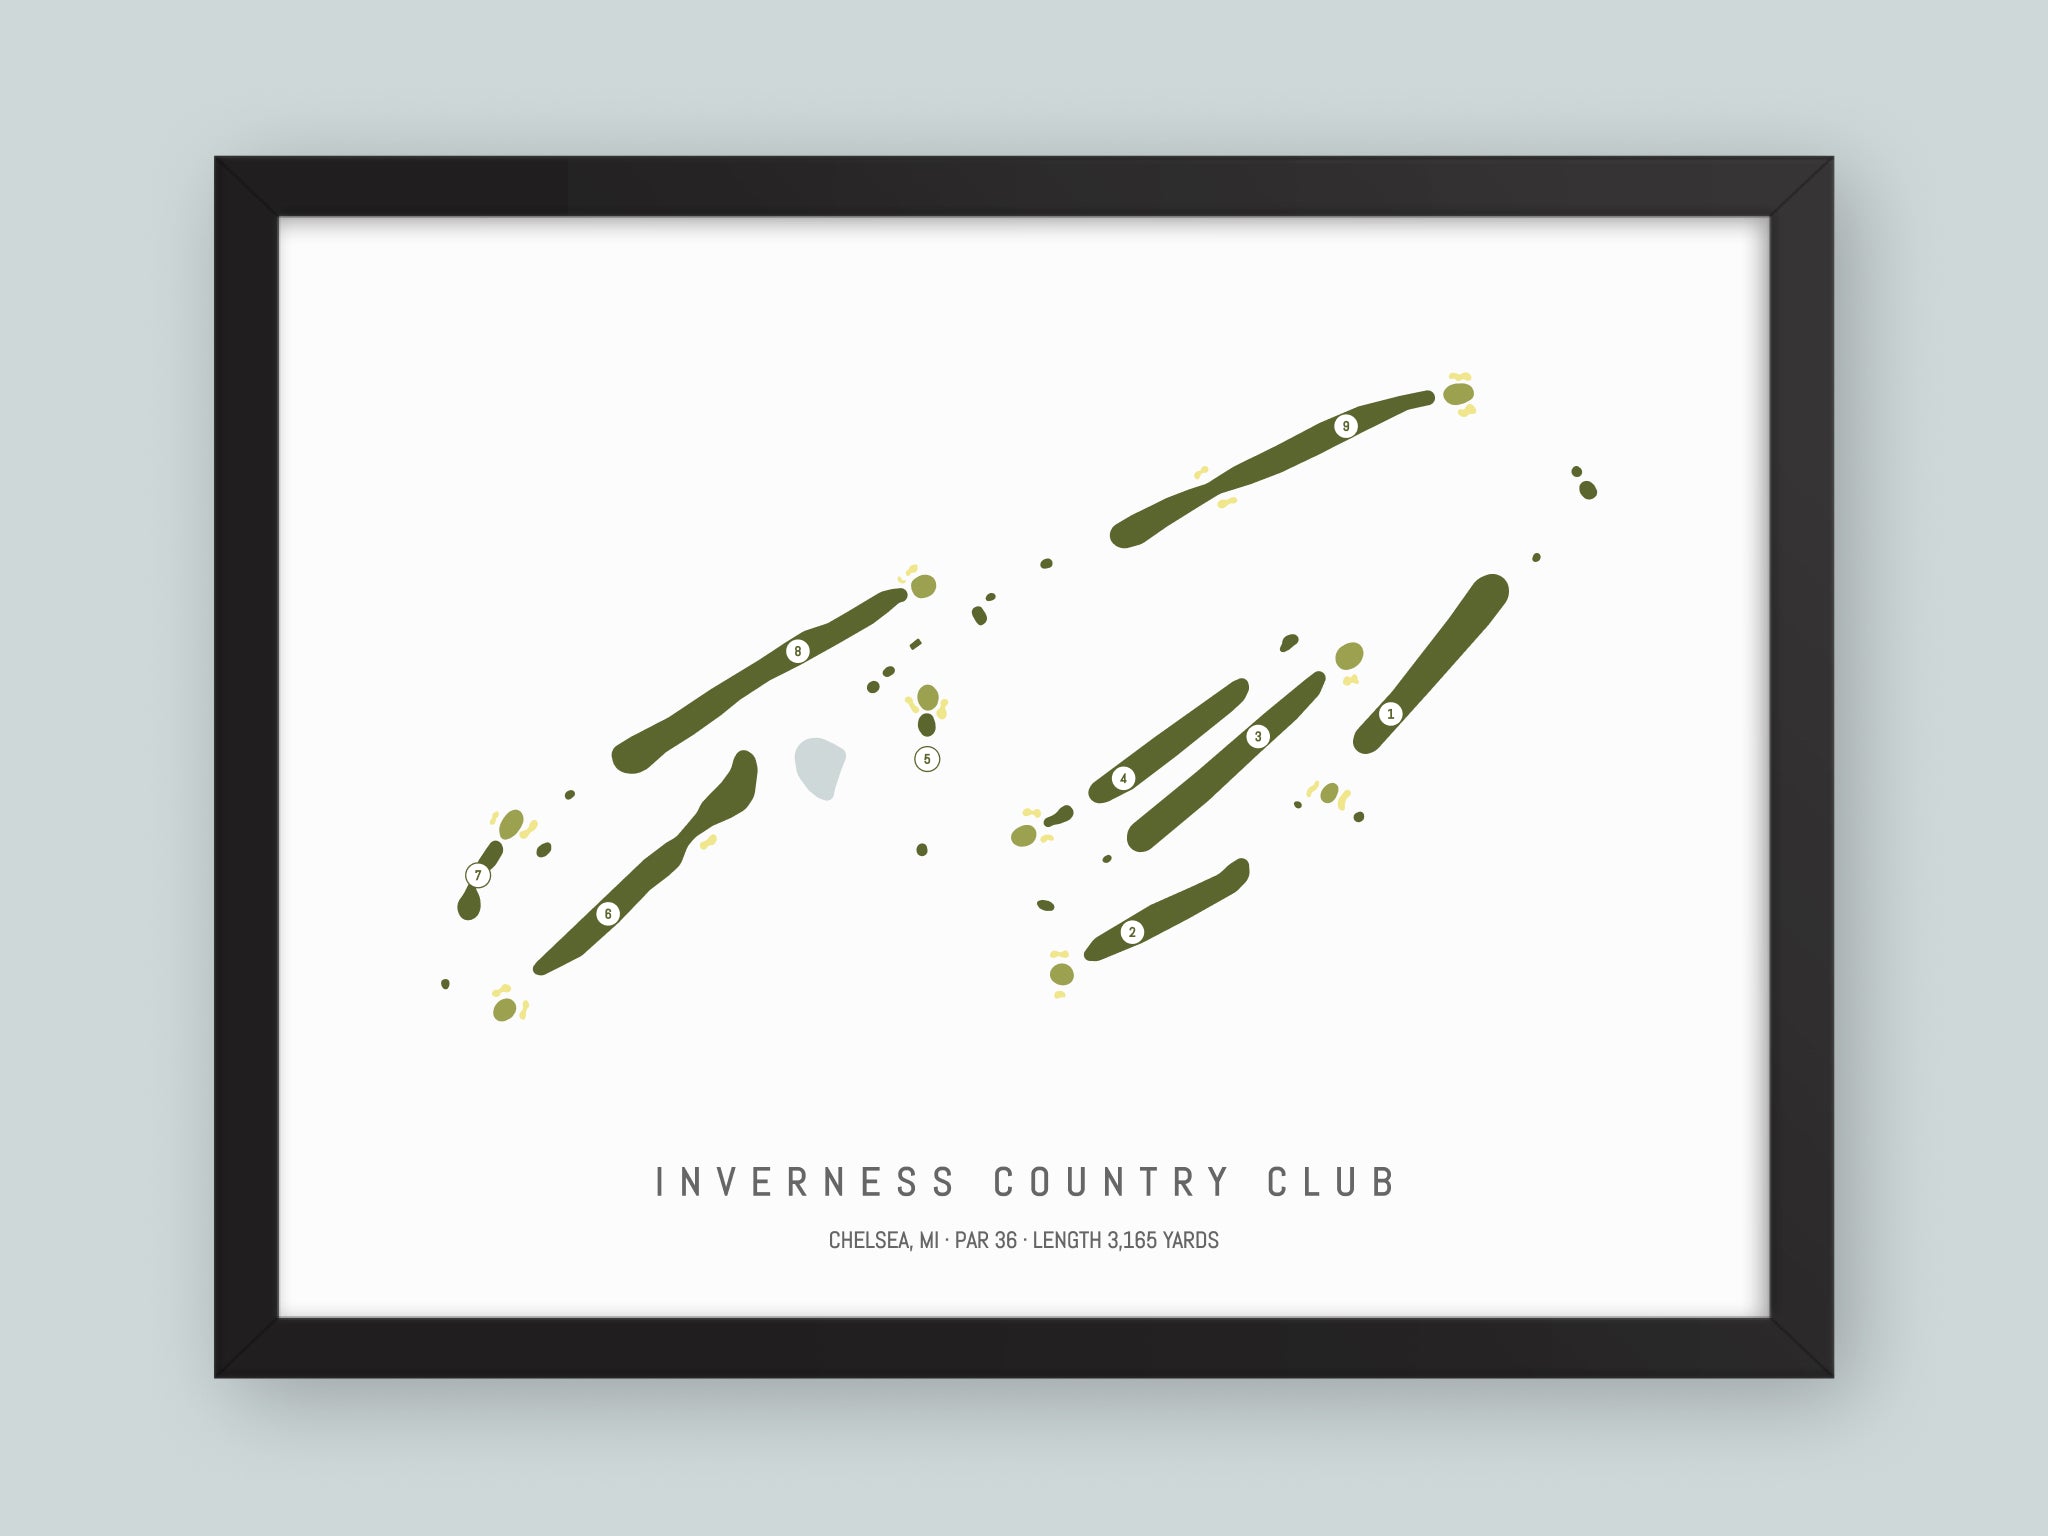 Inverness-Country-Club-MI--Black-Frame-24x18-With-Hole-Numbers